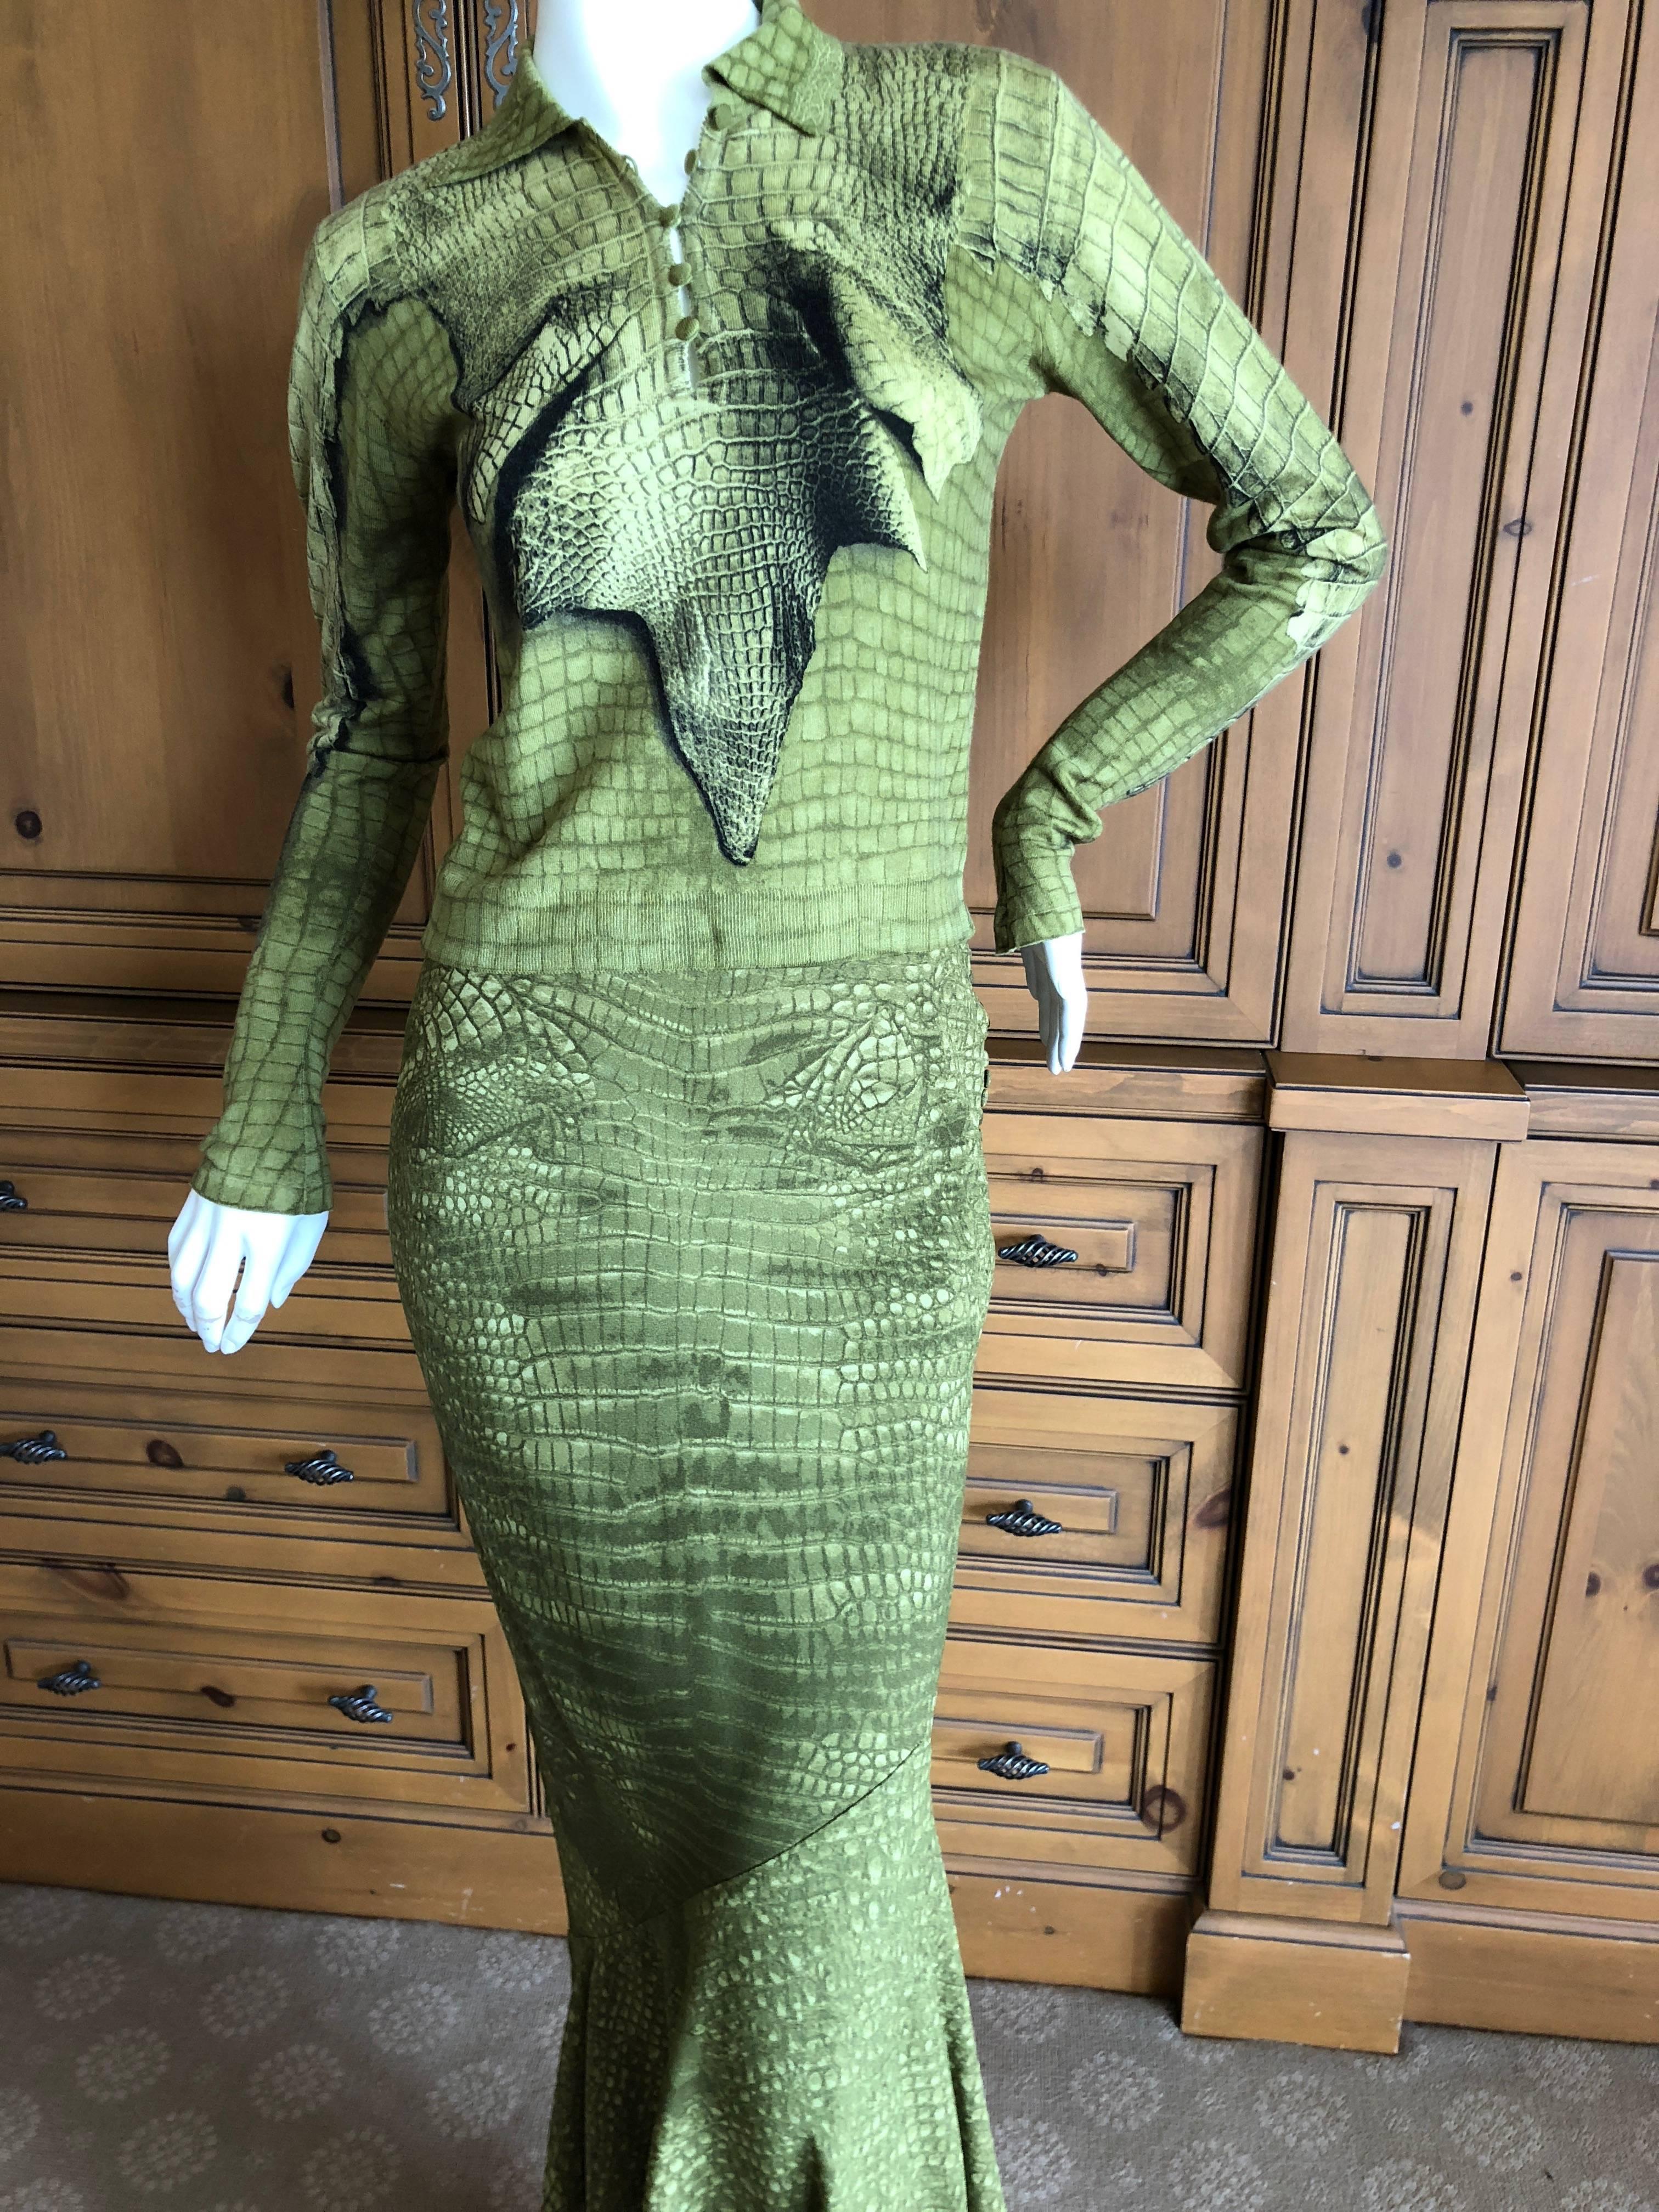 John Galliano 1990's Alligator Print Cashmere Sweater w Matching Mermaid Skirt.
The sweater is pure cashmere, the skirt is acetate.
This is so beautiful, please see all the photos.
Purchased together to fit the original owner, the skirt is marked